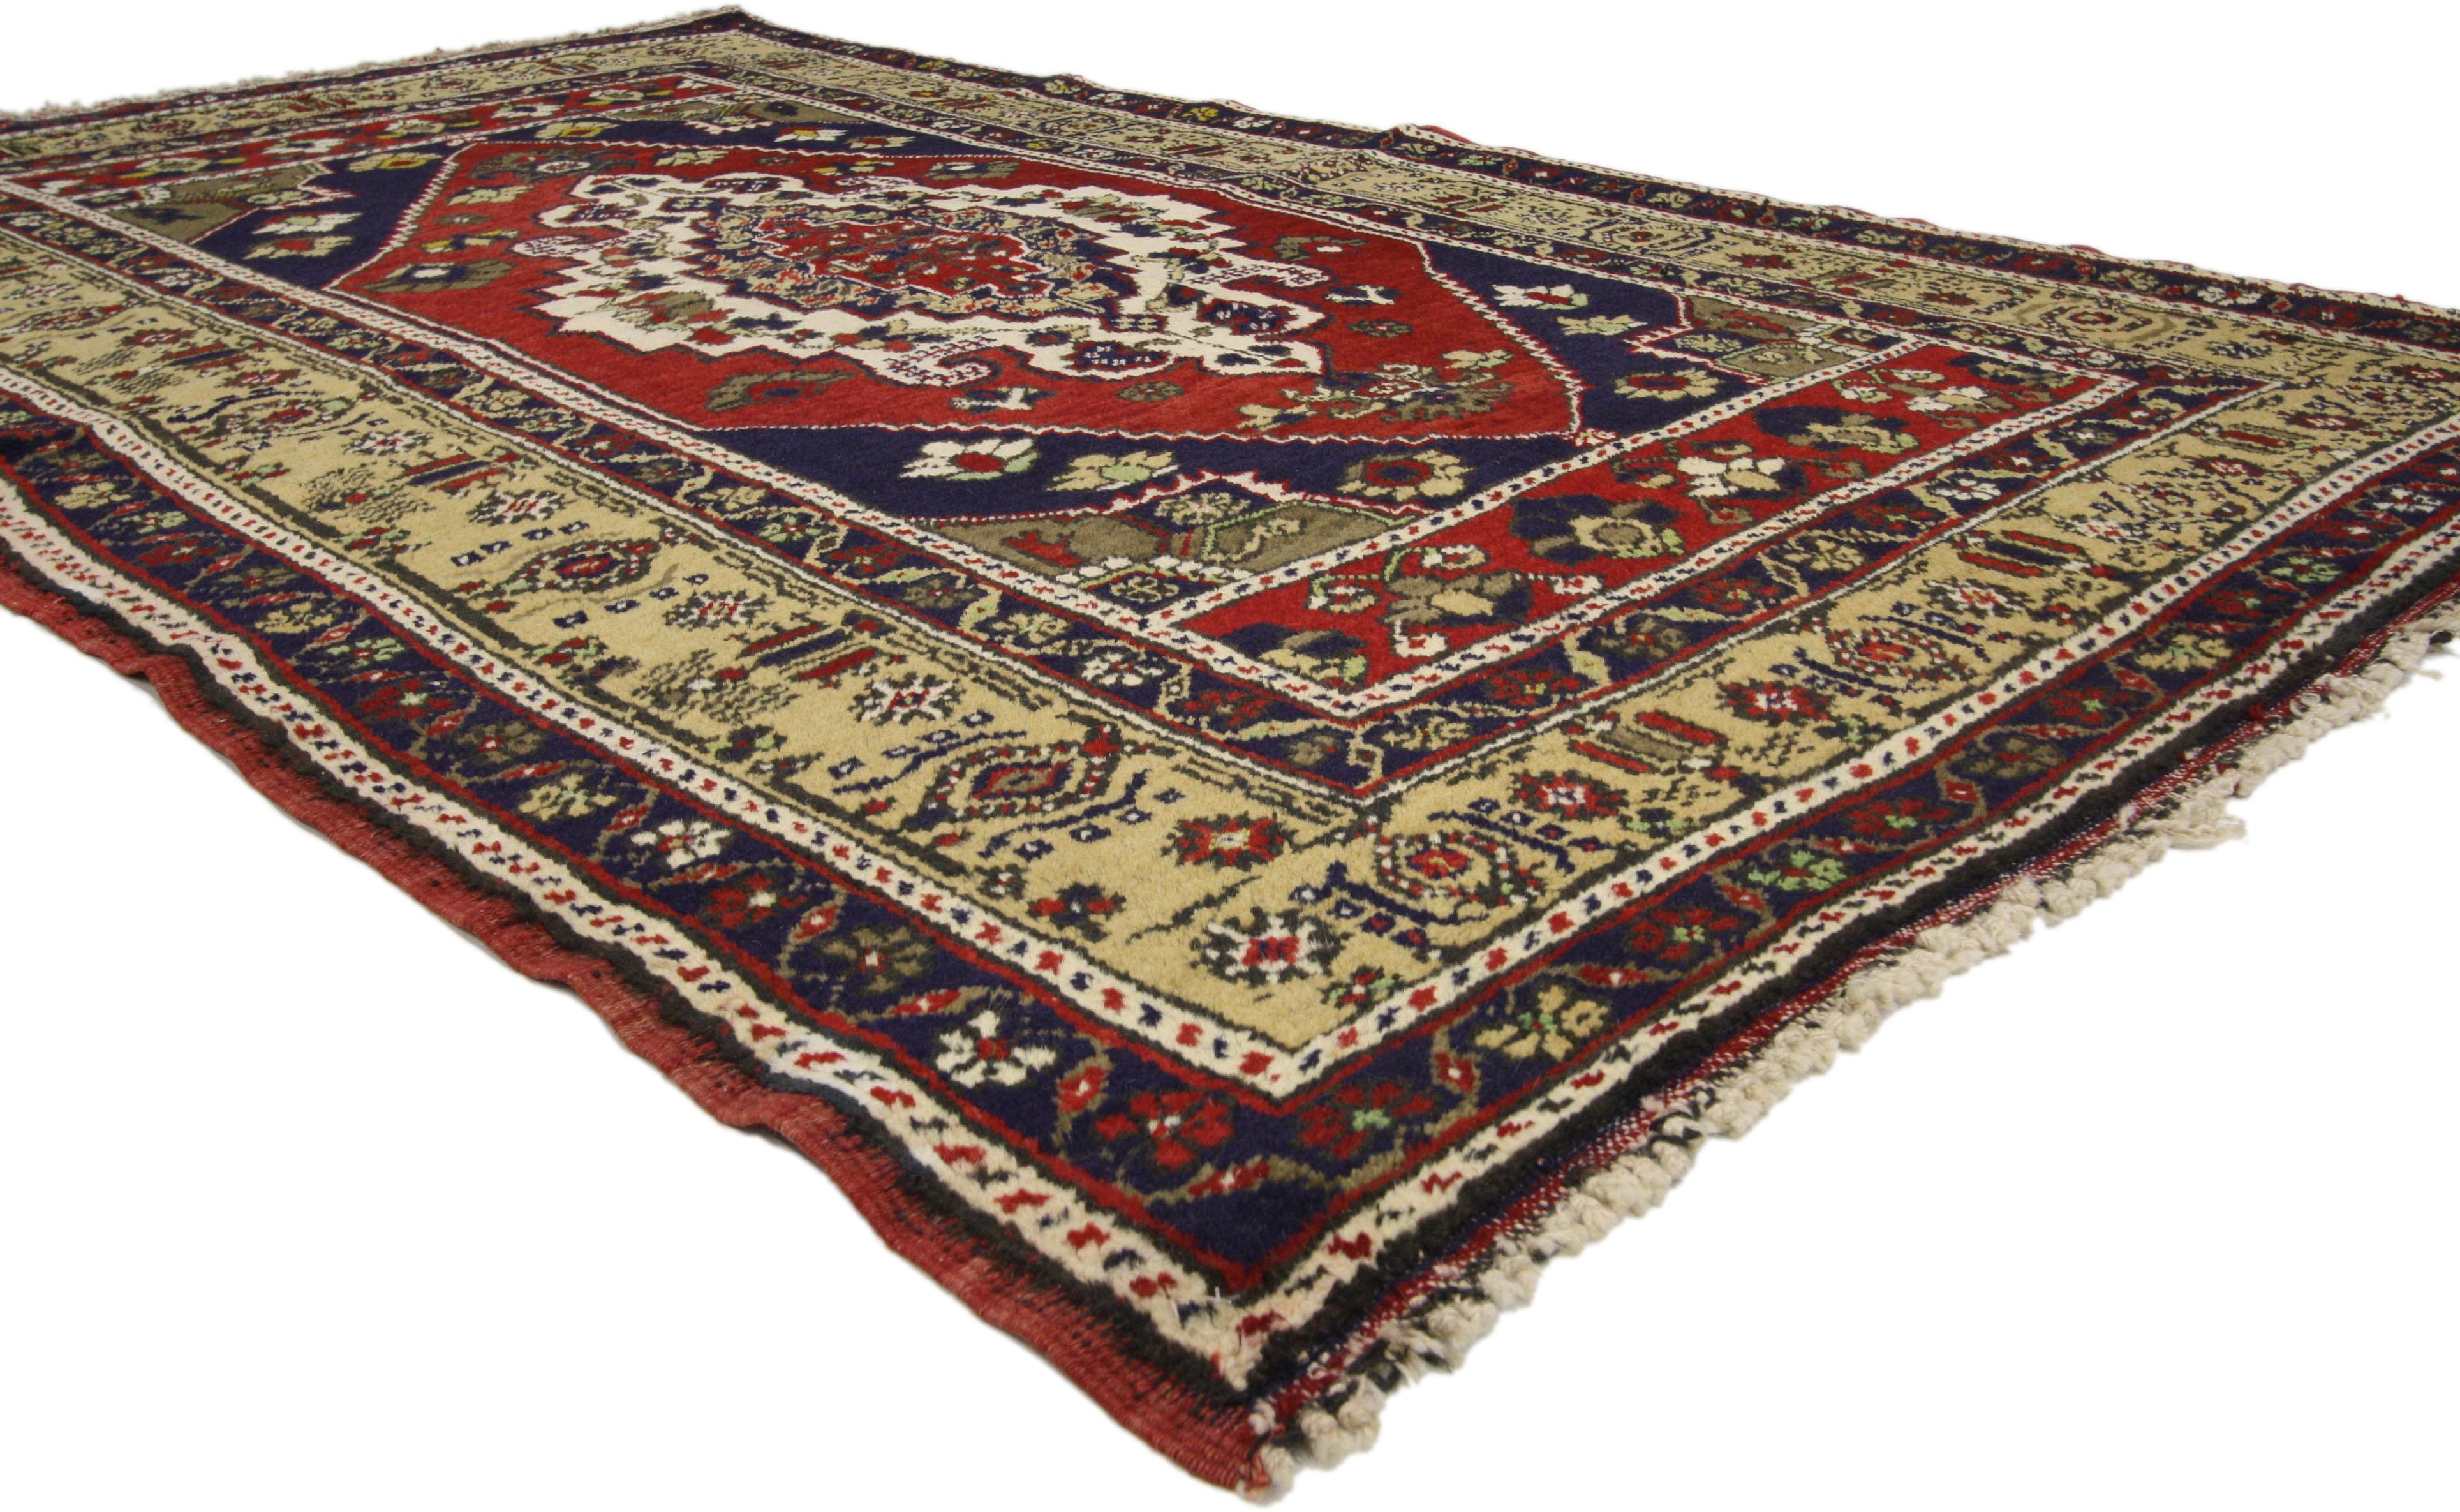 72689 vintage Turkish Oushak area rug with Luxe Medieval style, wide hallway runner. Immersed in Anatolian history, rich detail and dramatic colors, this hand-knotted wool vintage Oushak rug with Luxe Medieval style features a center medallion in a